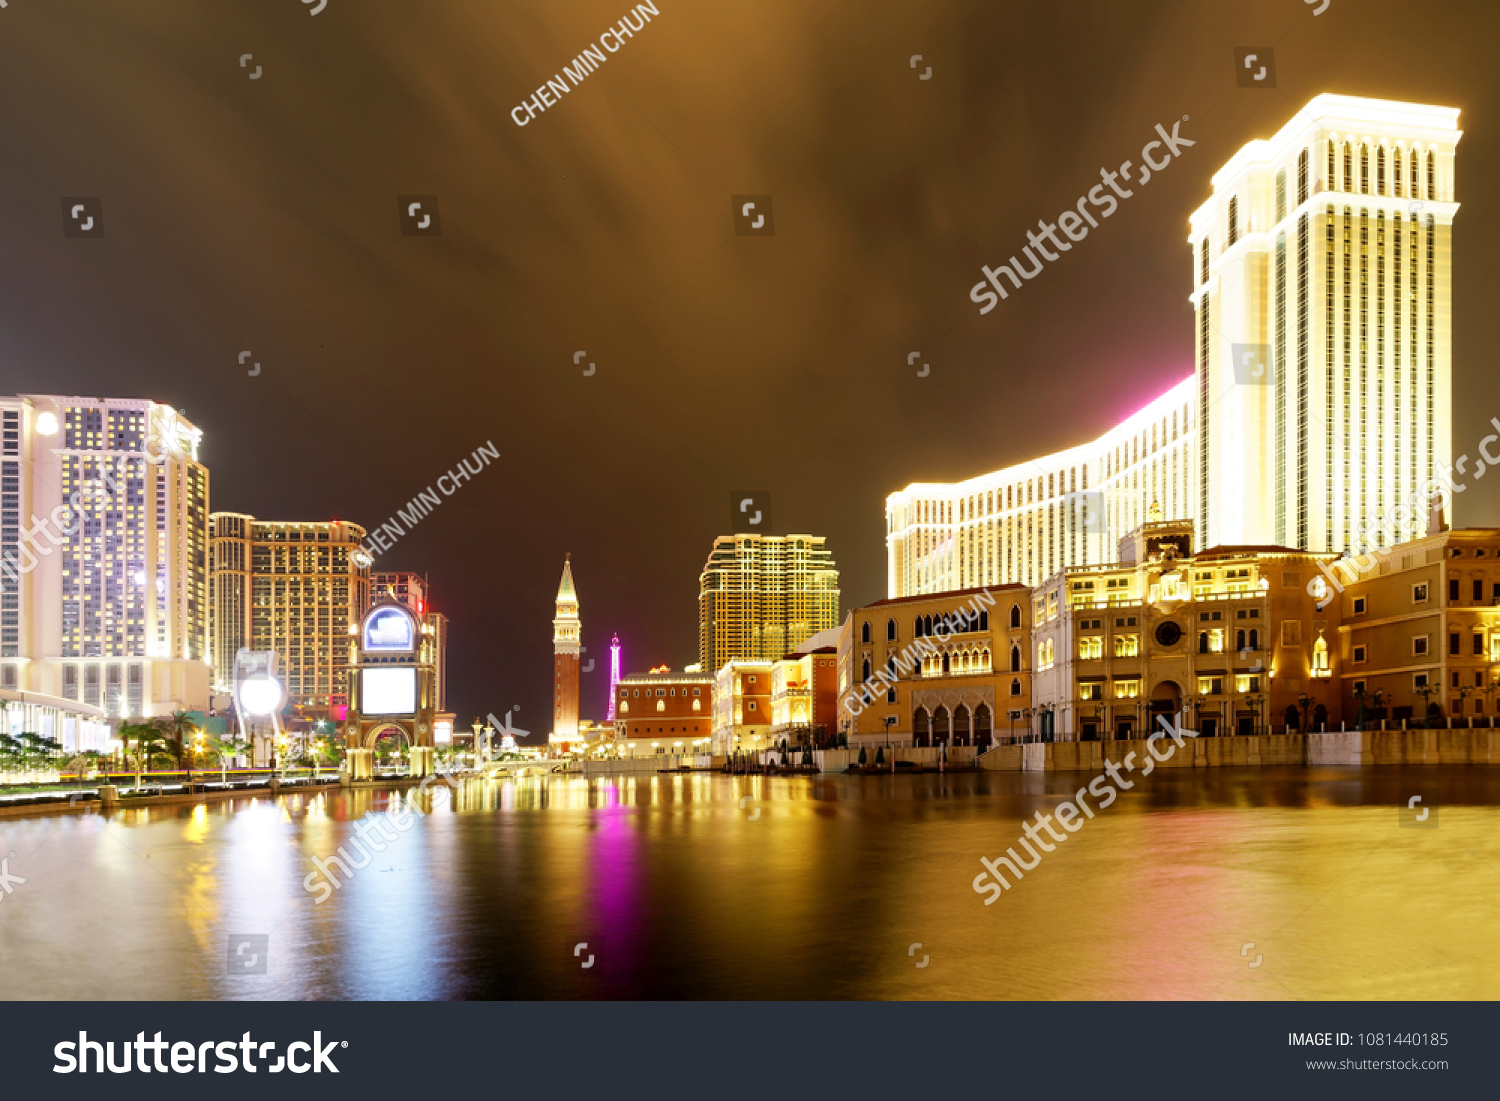 Night scenery of the grand exterior of The Venetian Macao among buildings of luxury hotels & extravagant casino resorts in Macau, China, with beautiful reflections of colorful neon lights in the water #1081440185